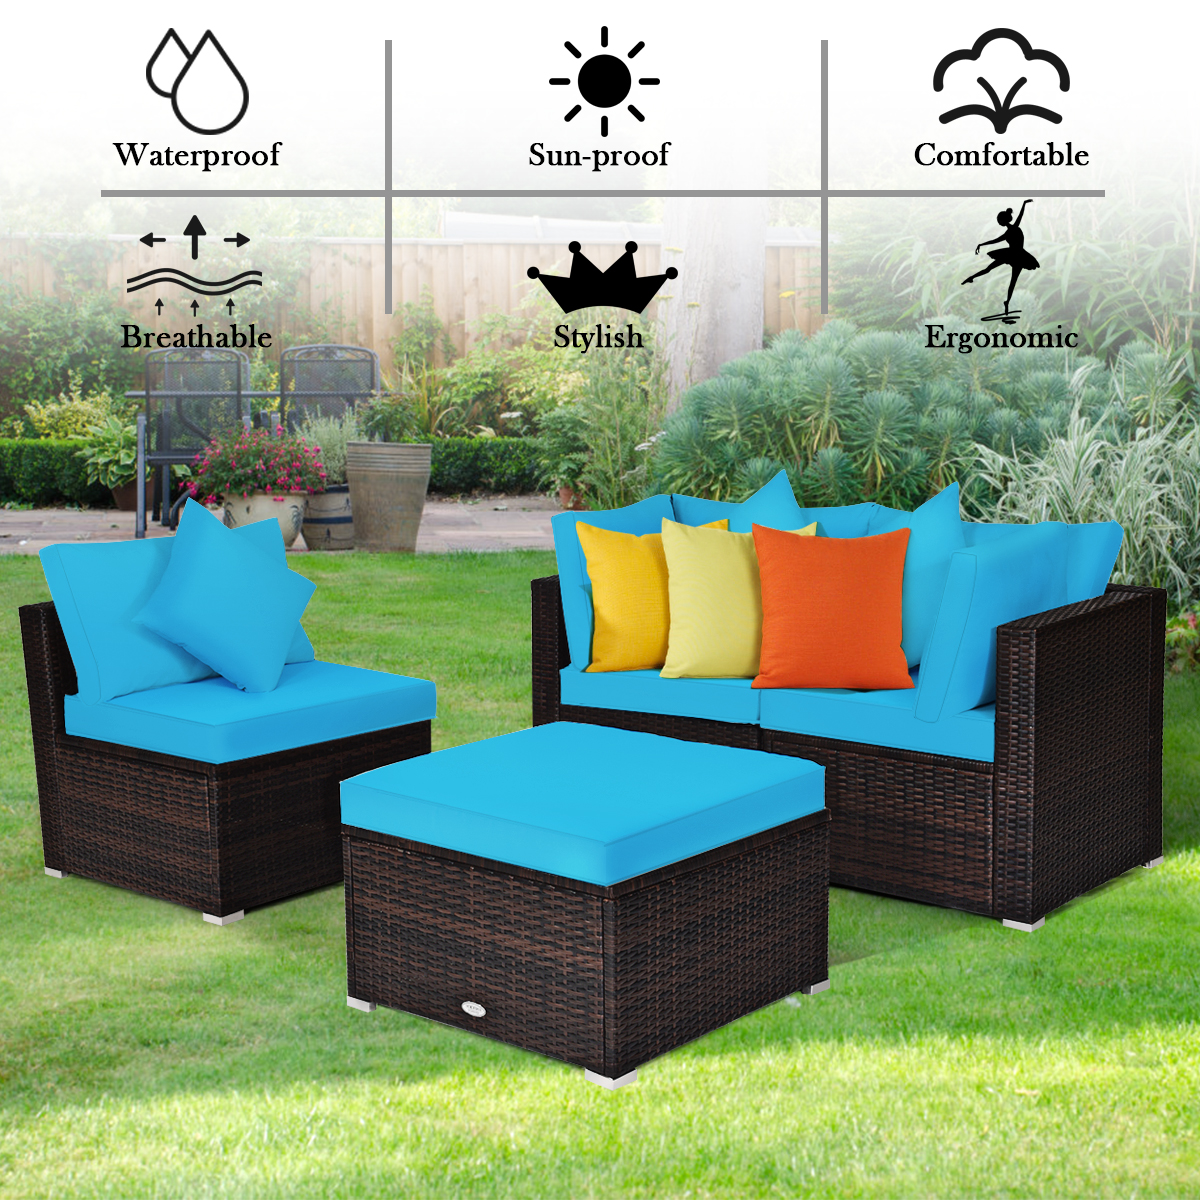 Turquoise_4_PCS_Patio_Rattan_Conversation_Set_with_Coffee_Table-3.jpg